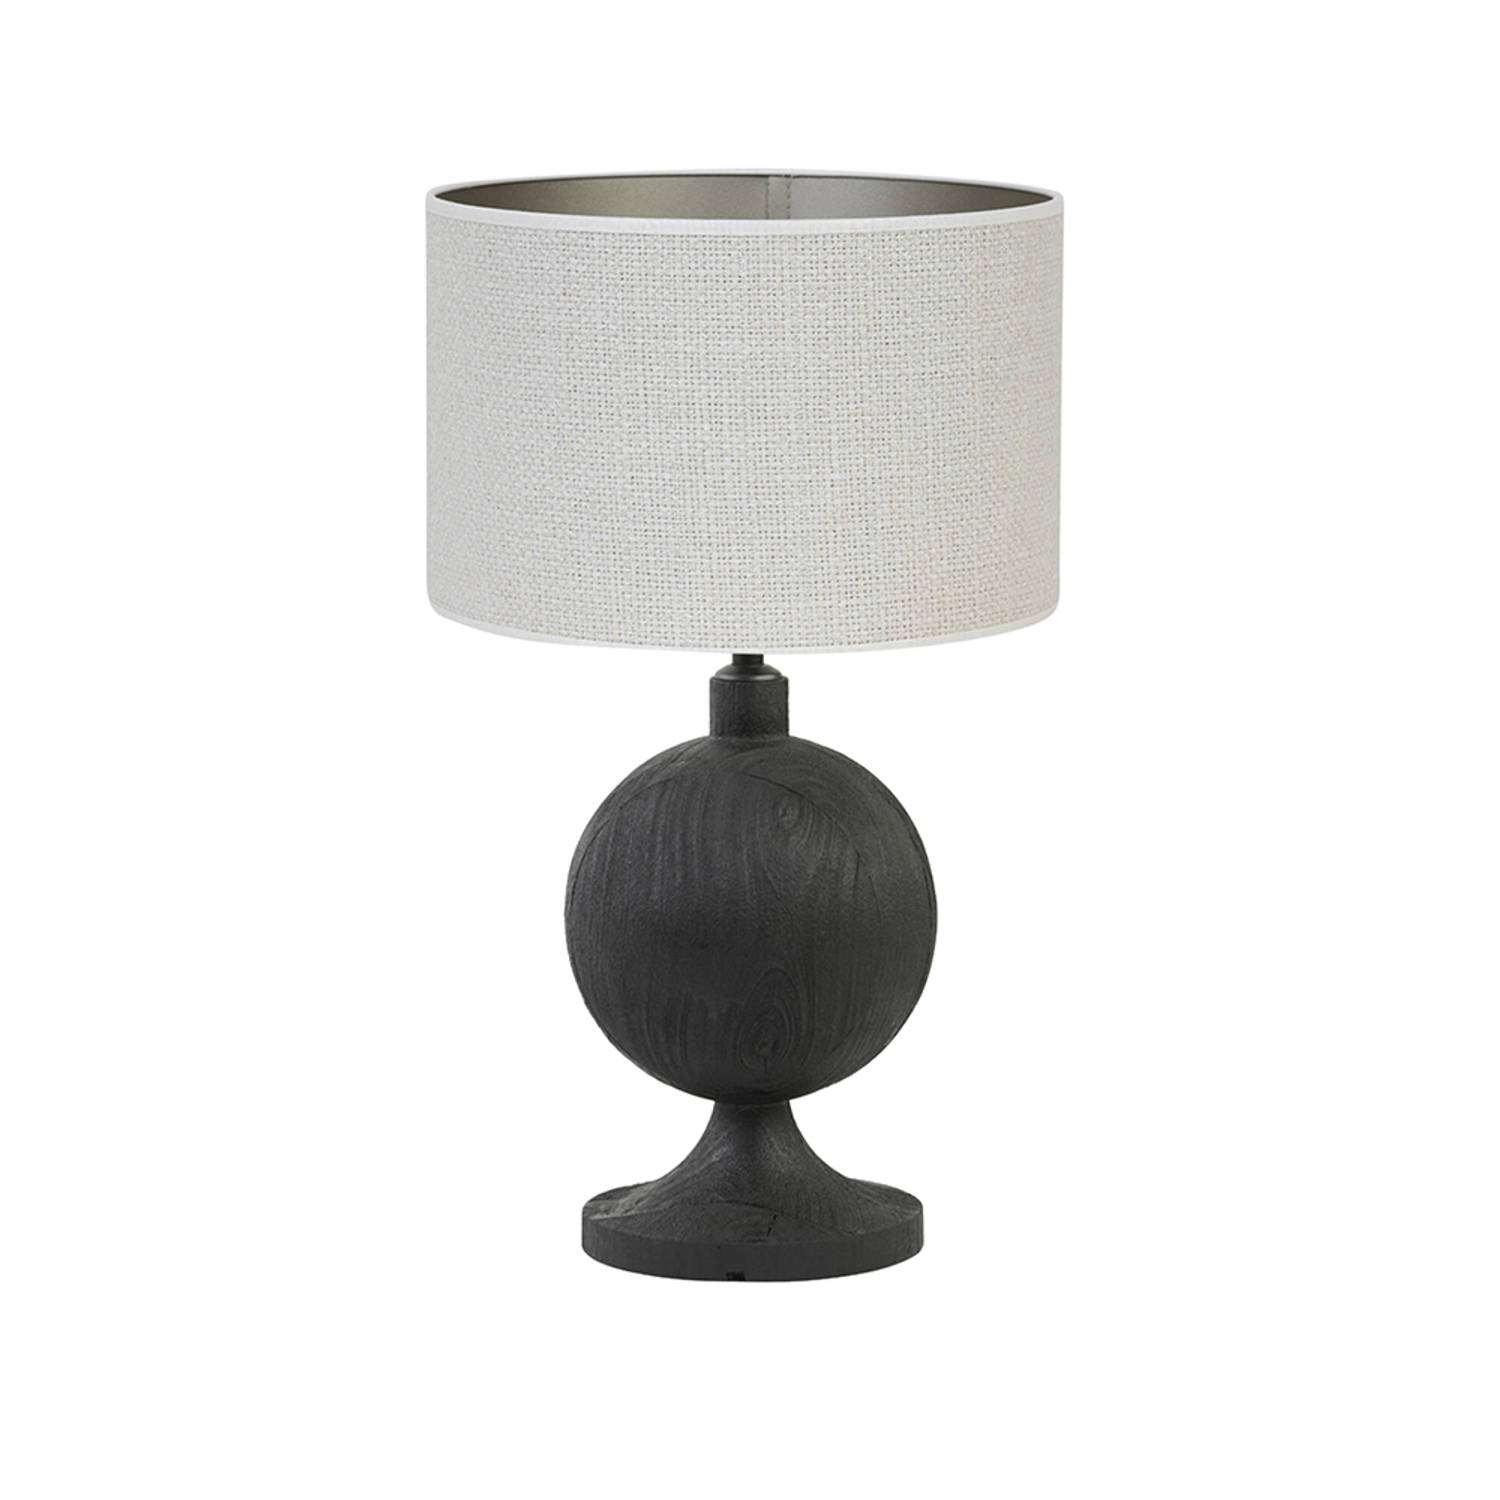 Light and Living Tomasso tafellamp - Ø 30 cm - E27 (grote fitting) - wit